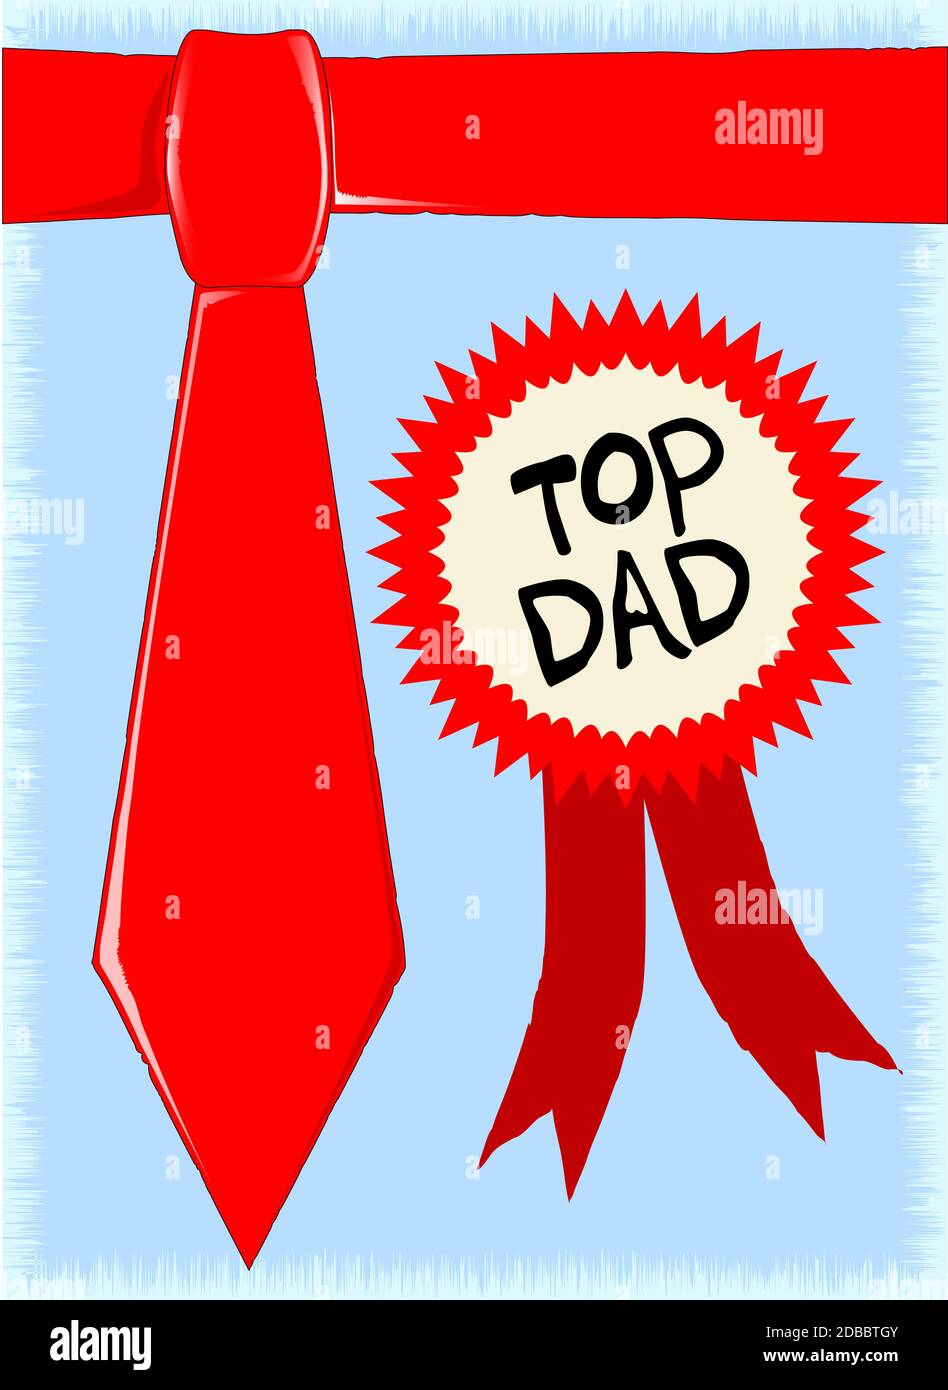 Red tie on black background with a rosette for top dad - no mesh. Stock Photo